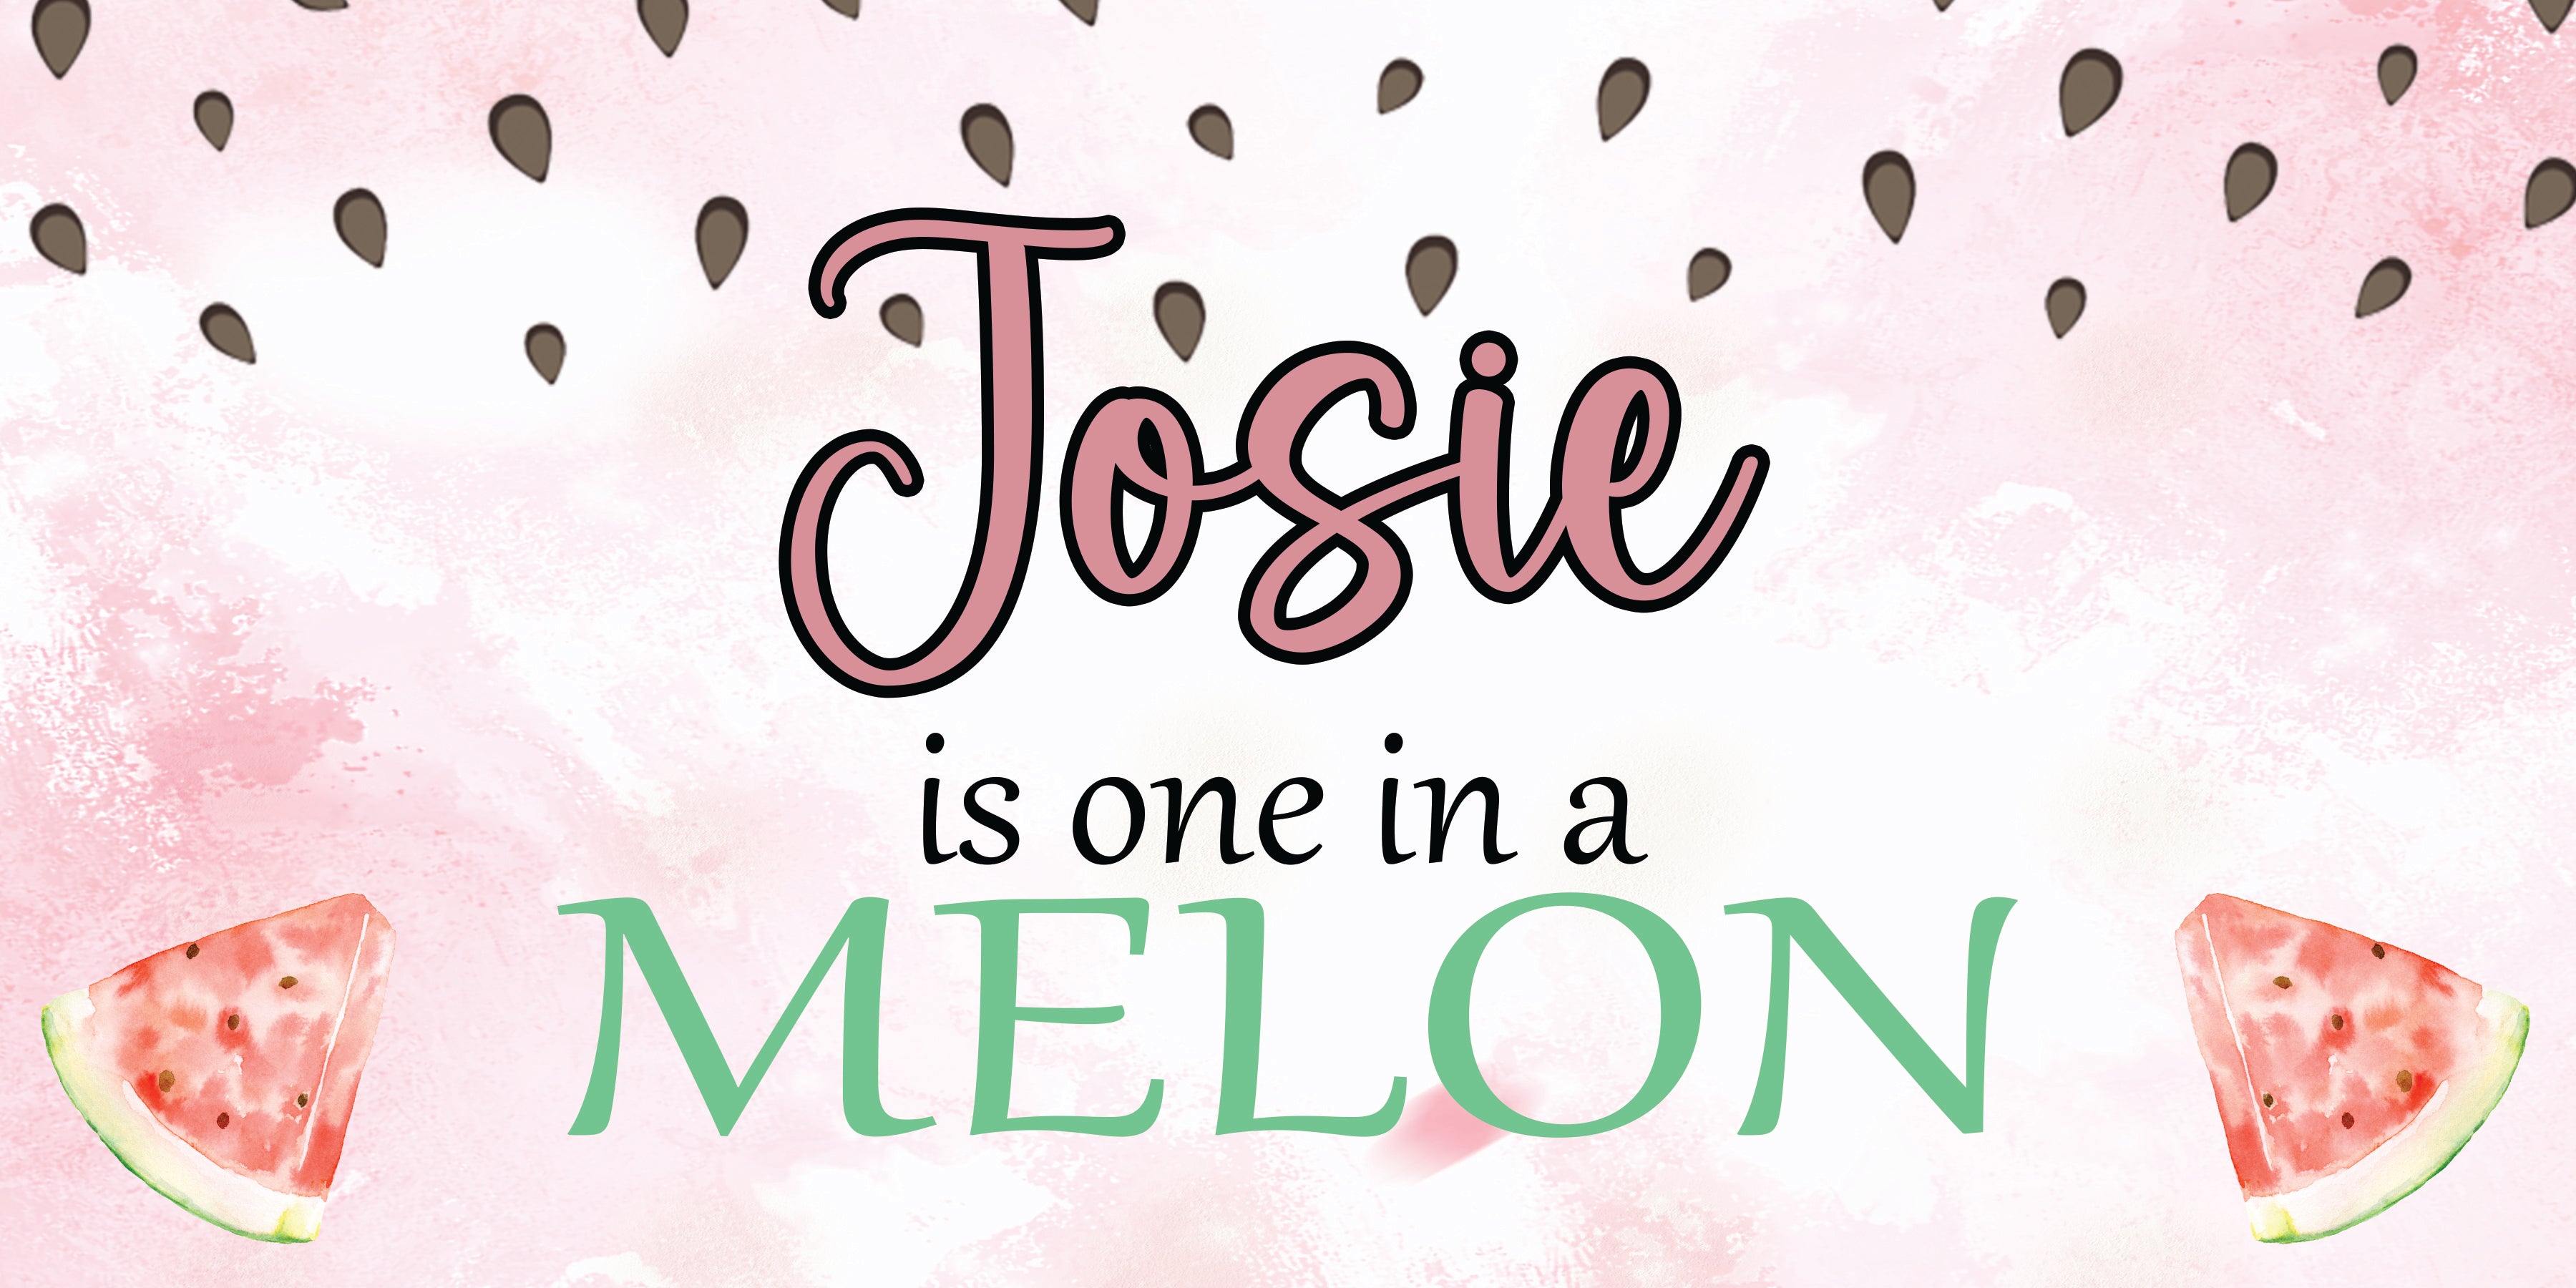 Custom Banner - One in a Melon - POPPartyballoons